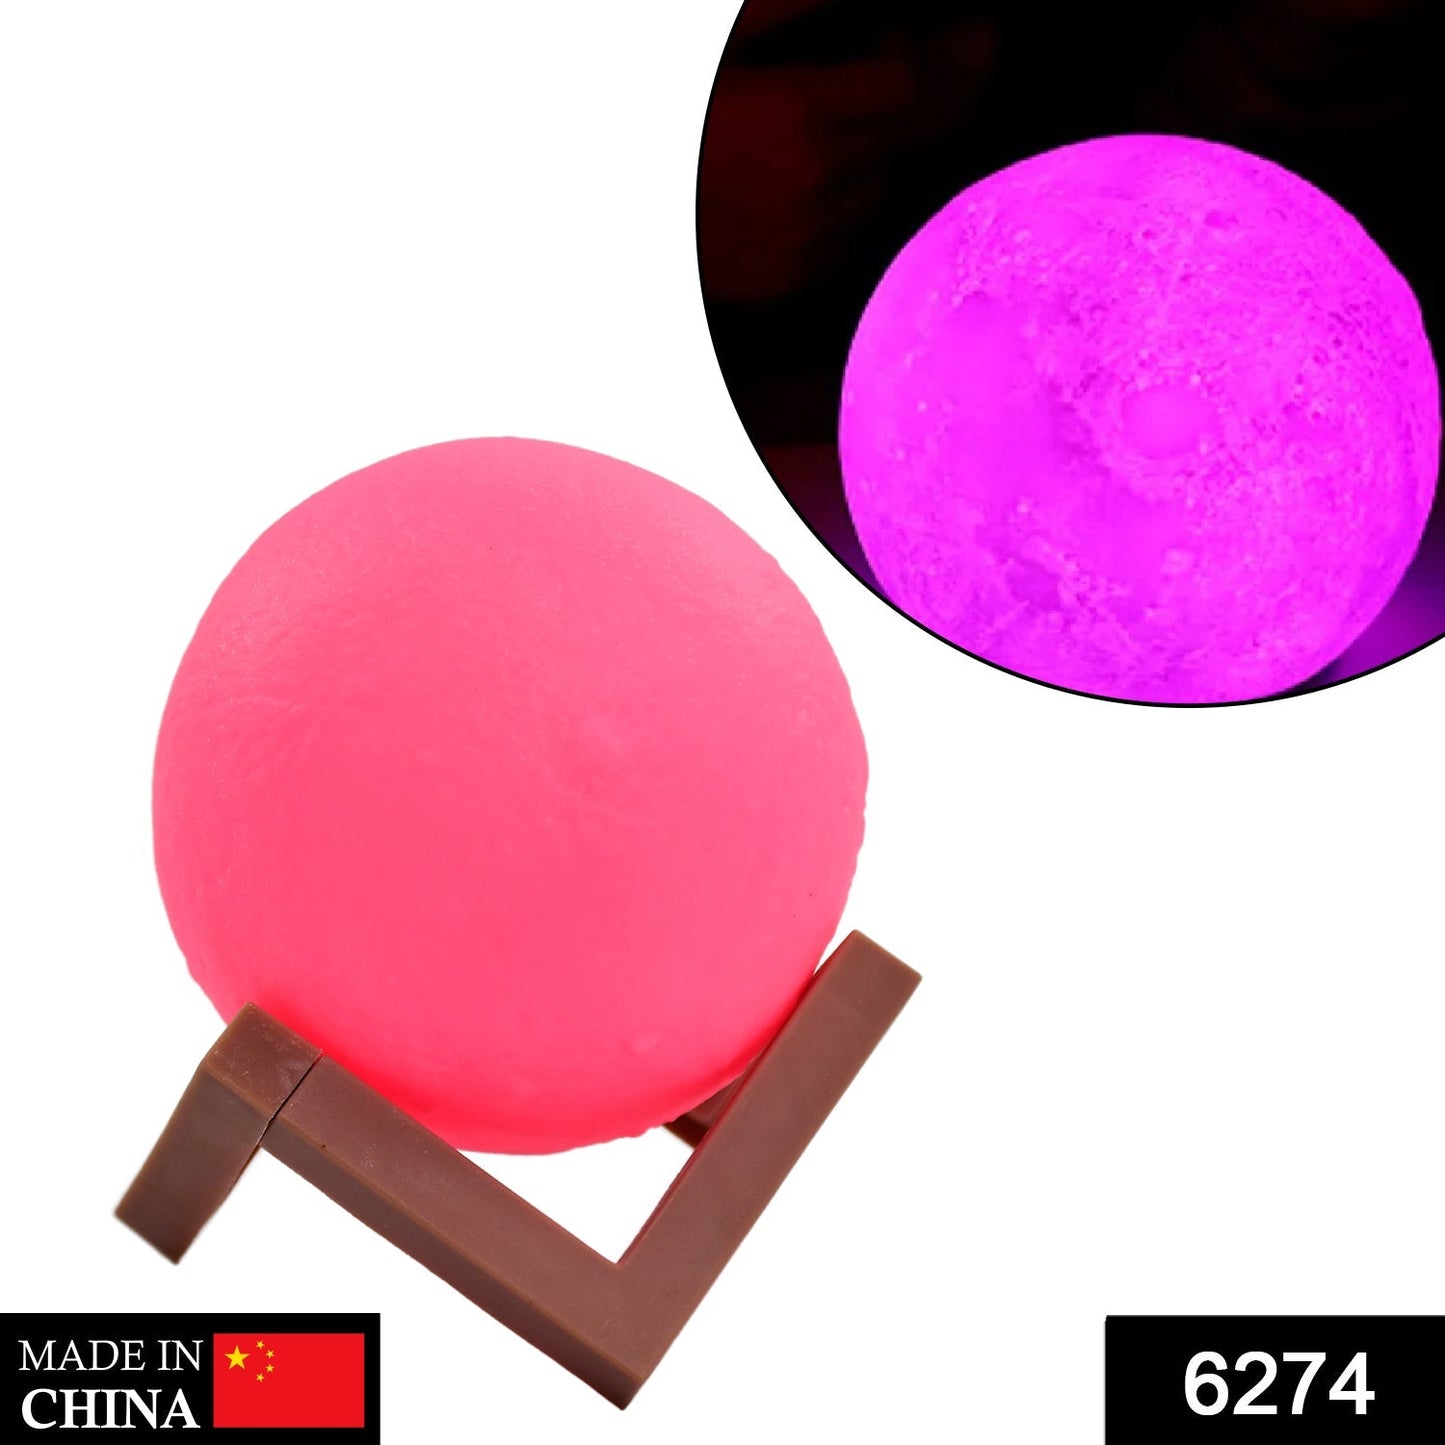 6274 Moon Night Lamp Pink Color with Wooden Stand Night Lamp for Bedroom